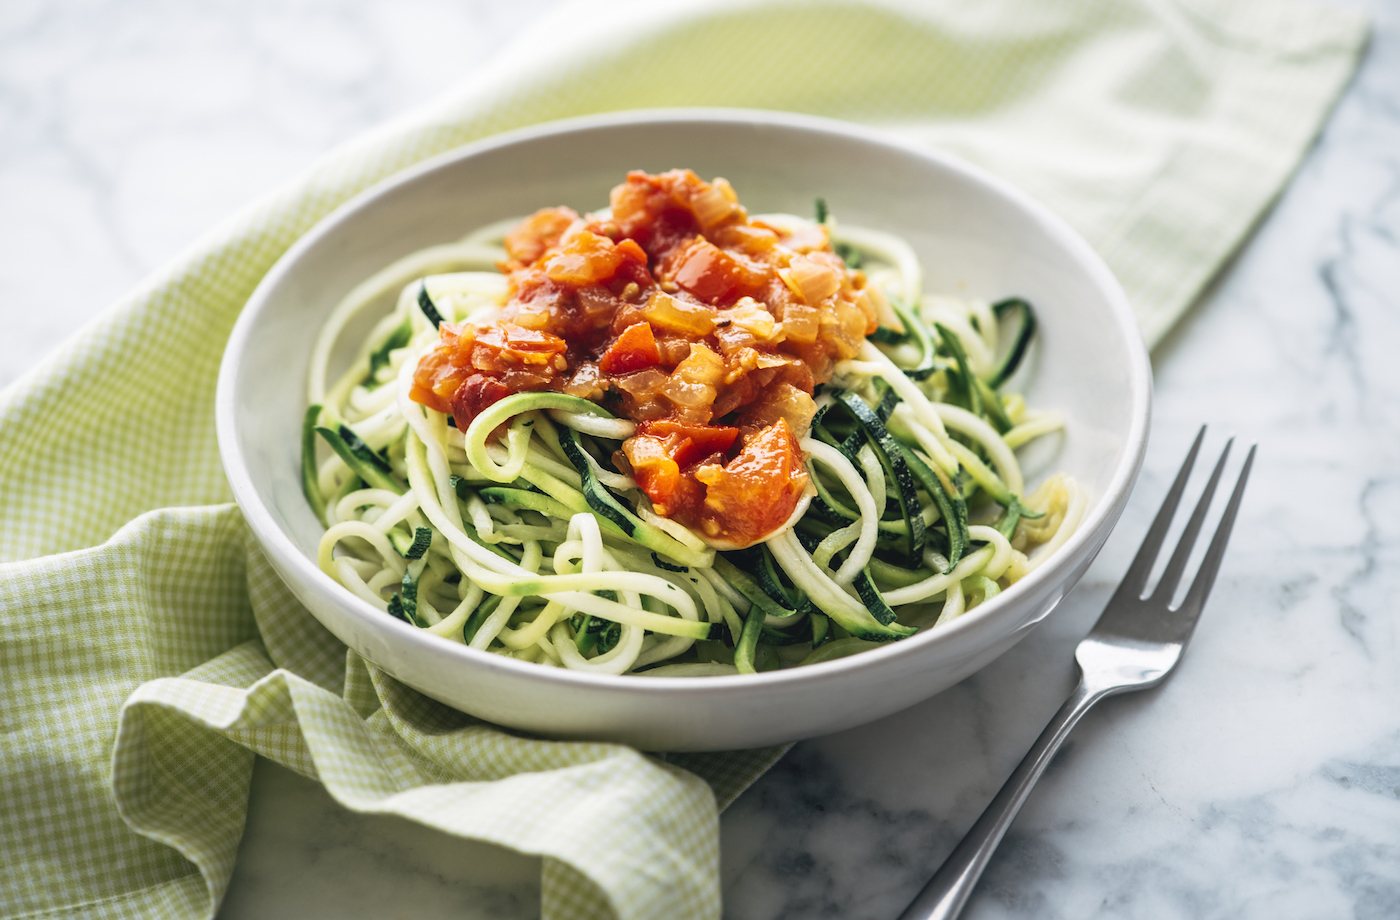 whole30 meal ideas and macros suggestions zucchini noodles with fresh tomato sauce in bowl